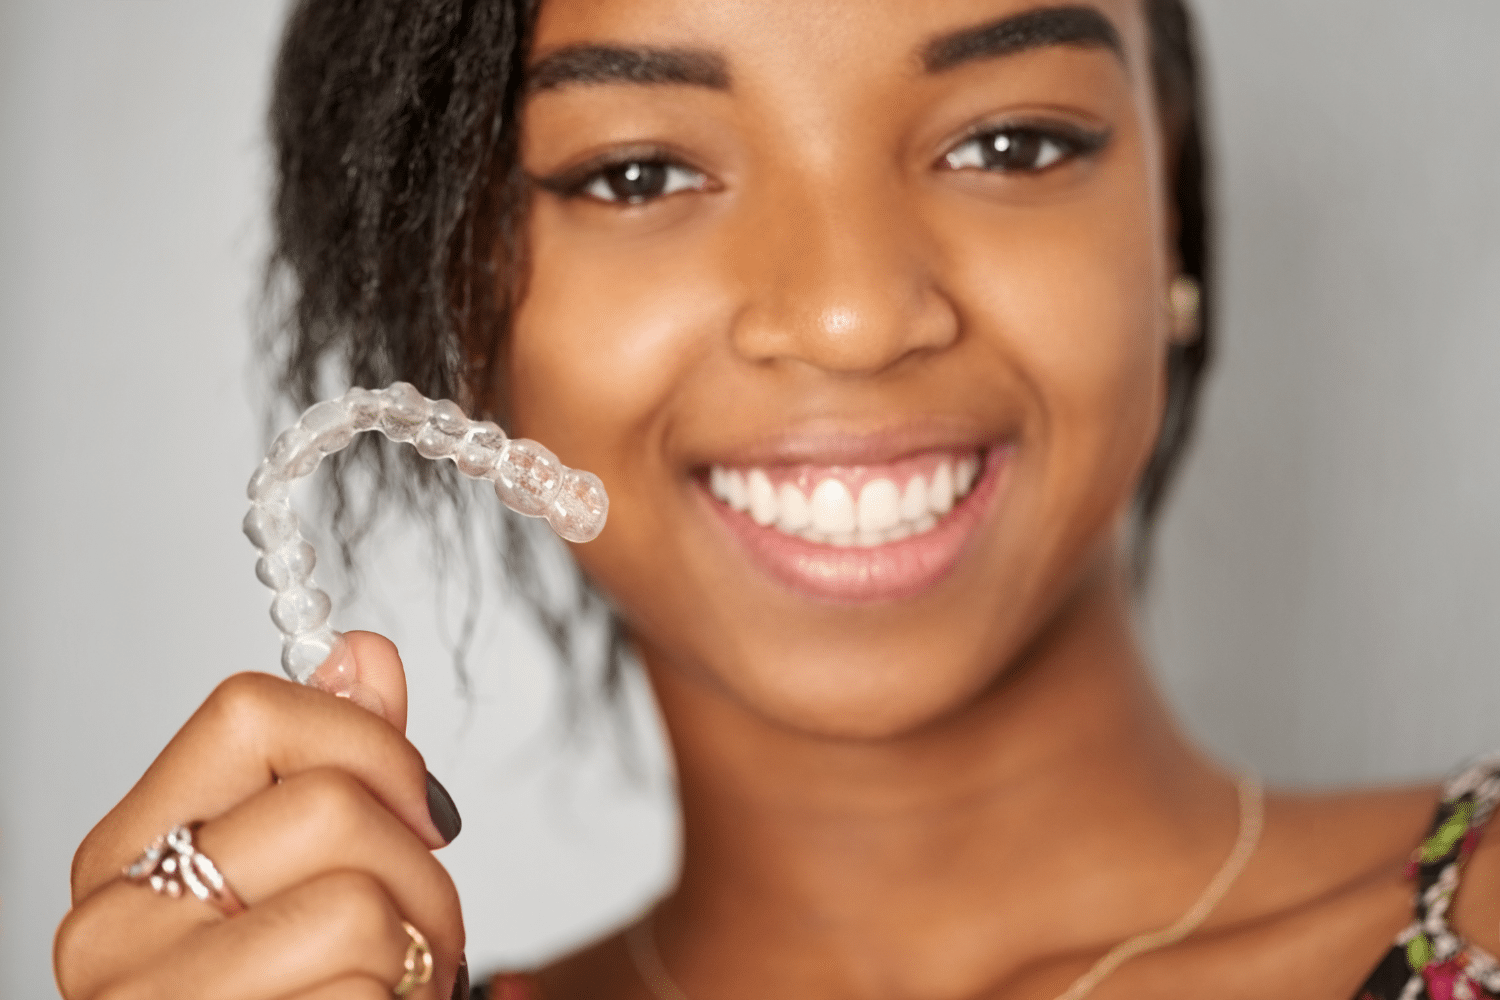 Invisalign - Invisible Braces - Livermore Dentists - Awesome Smiles Dental  Care - Dr. Ann Khazzandra Uy Miranda DDS - Dr. Miranda has been serving the  community of Livermore, CA 94551 as